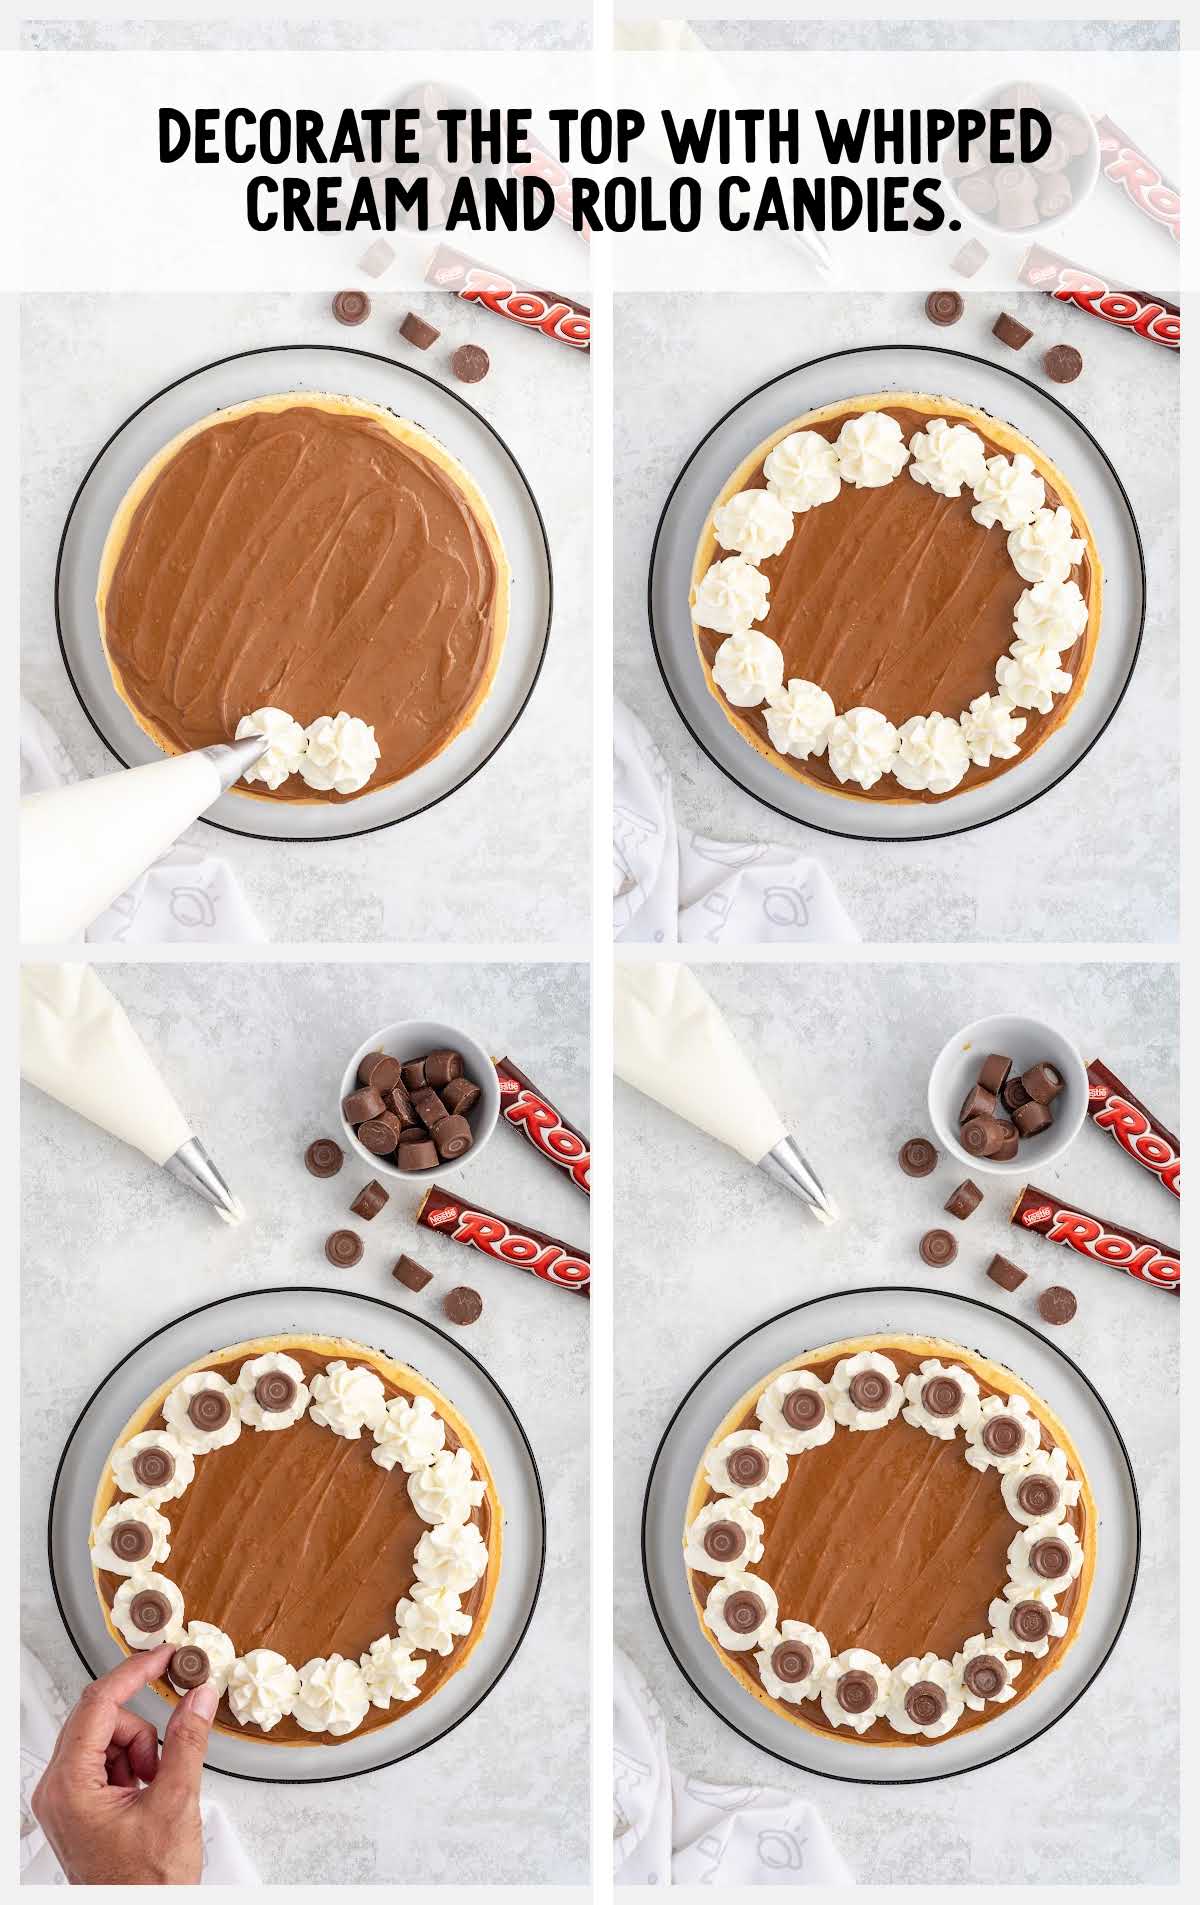 decorate cheesecake with whipped cream and rolo candies